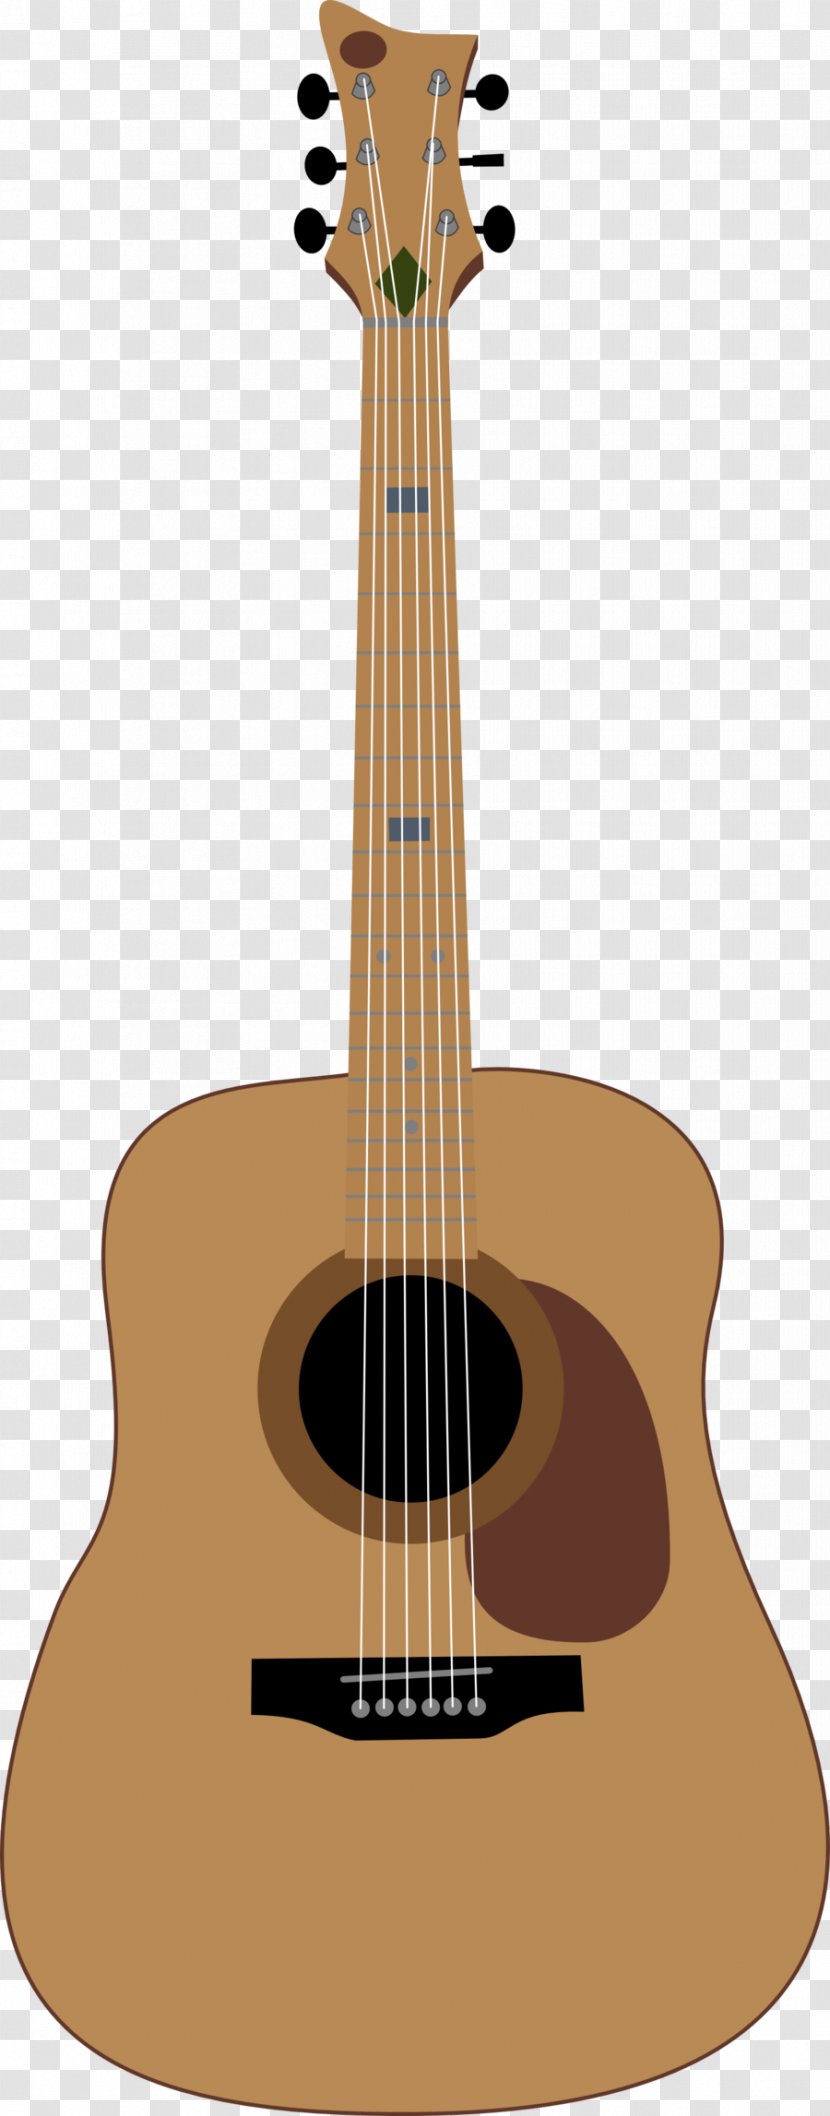 Acoustic Guitar Takamine Guitars Musical Instruments Cutaway - Silhouette Transparent PNG